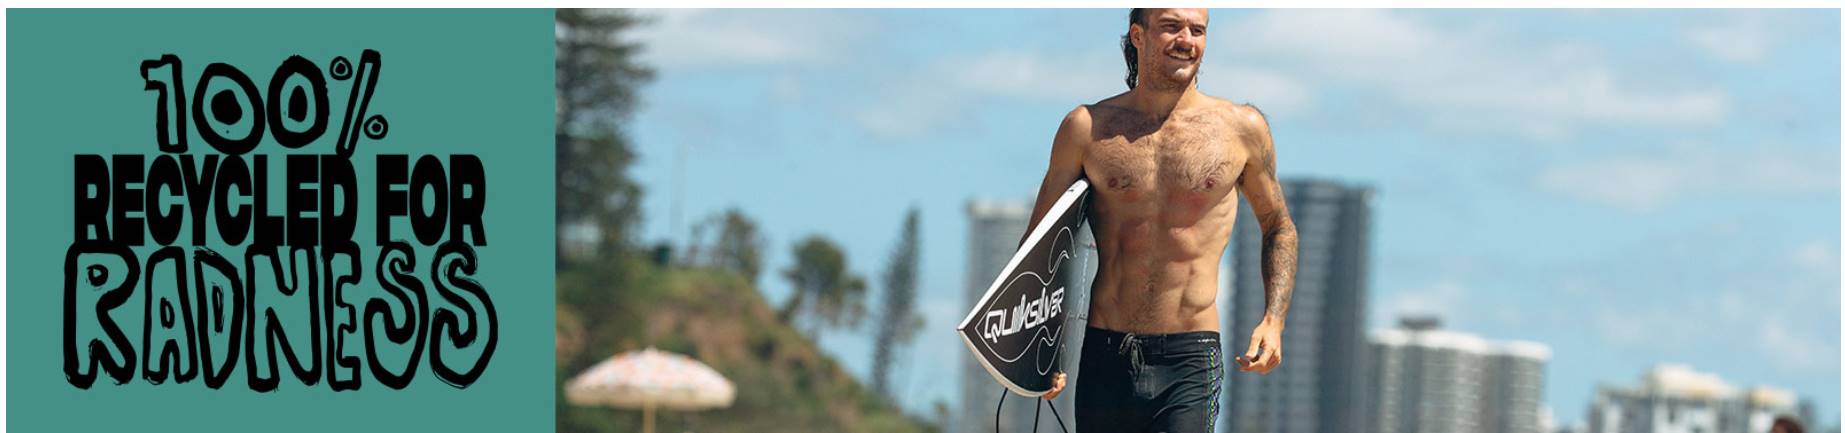 Quiksilver - 100% Recycled Radness boardshorts